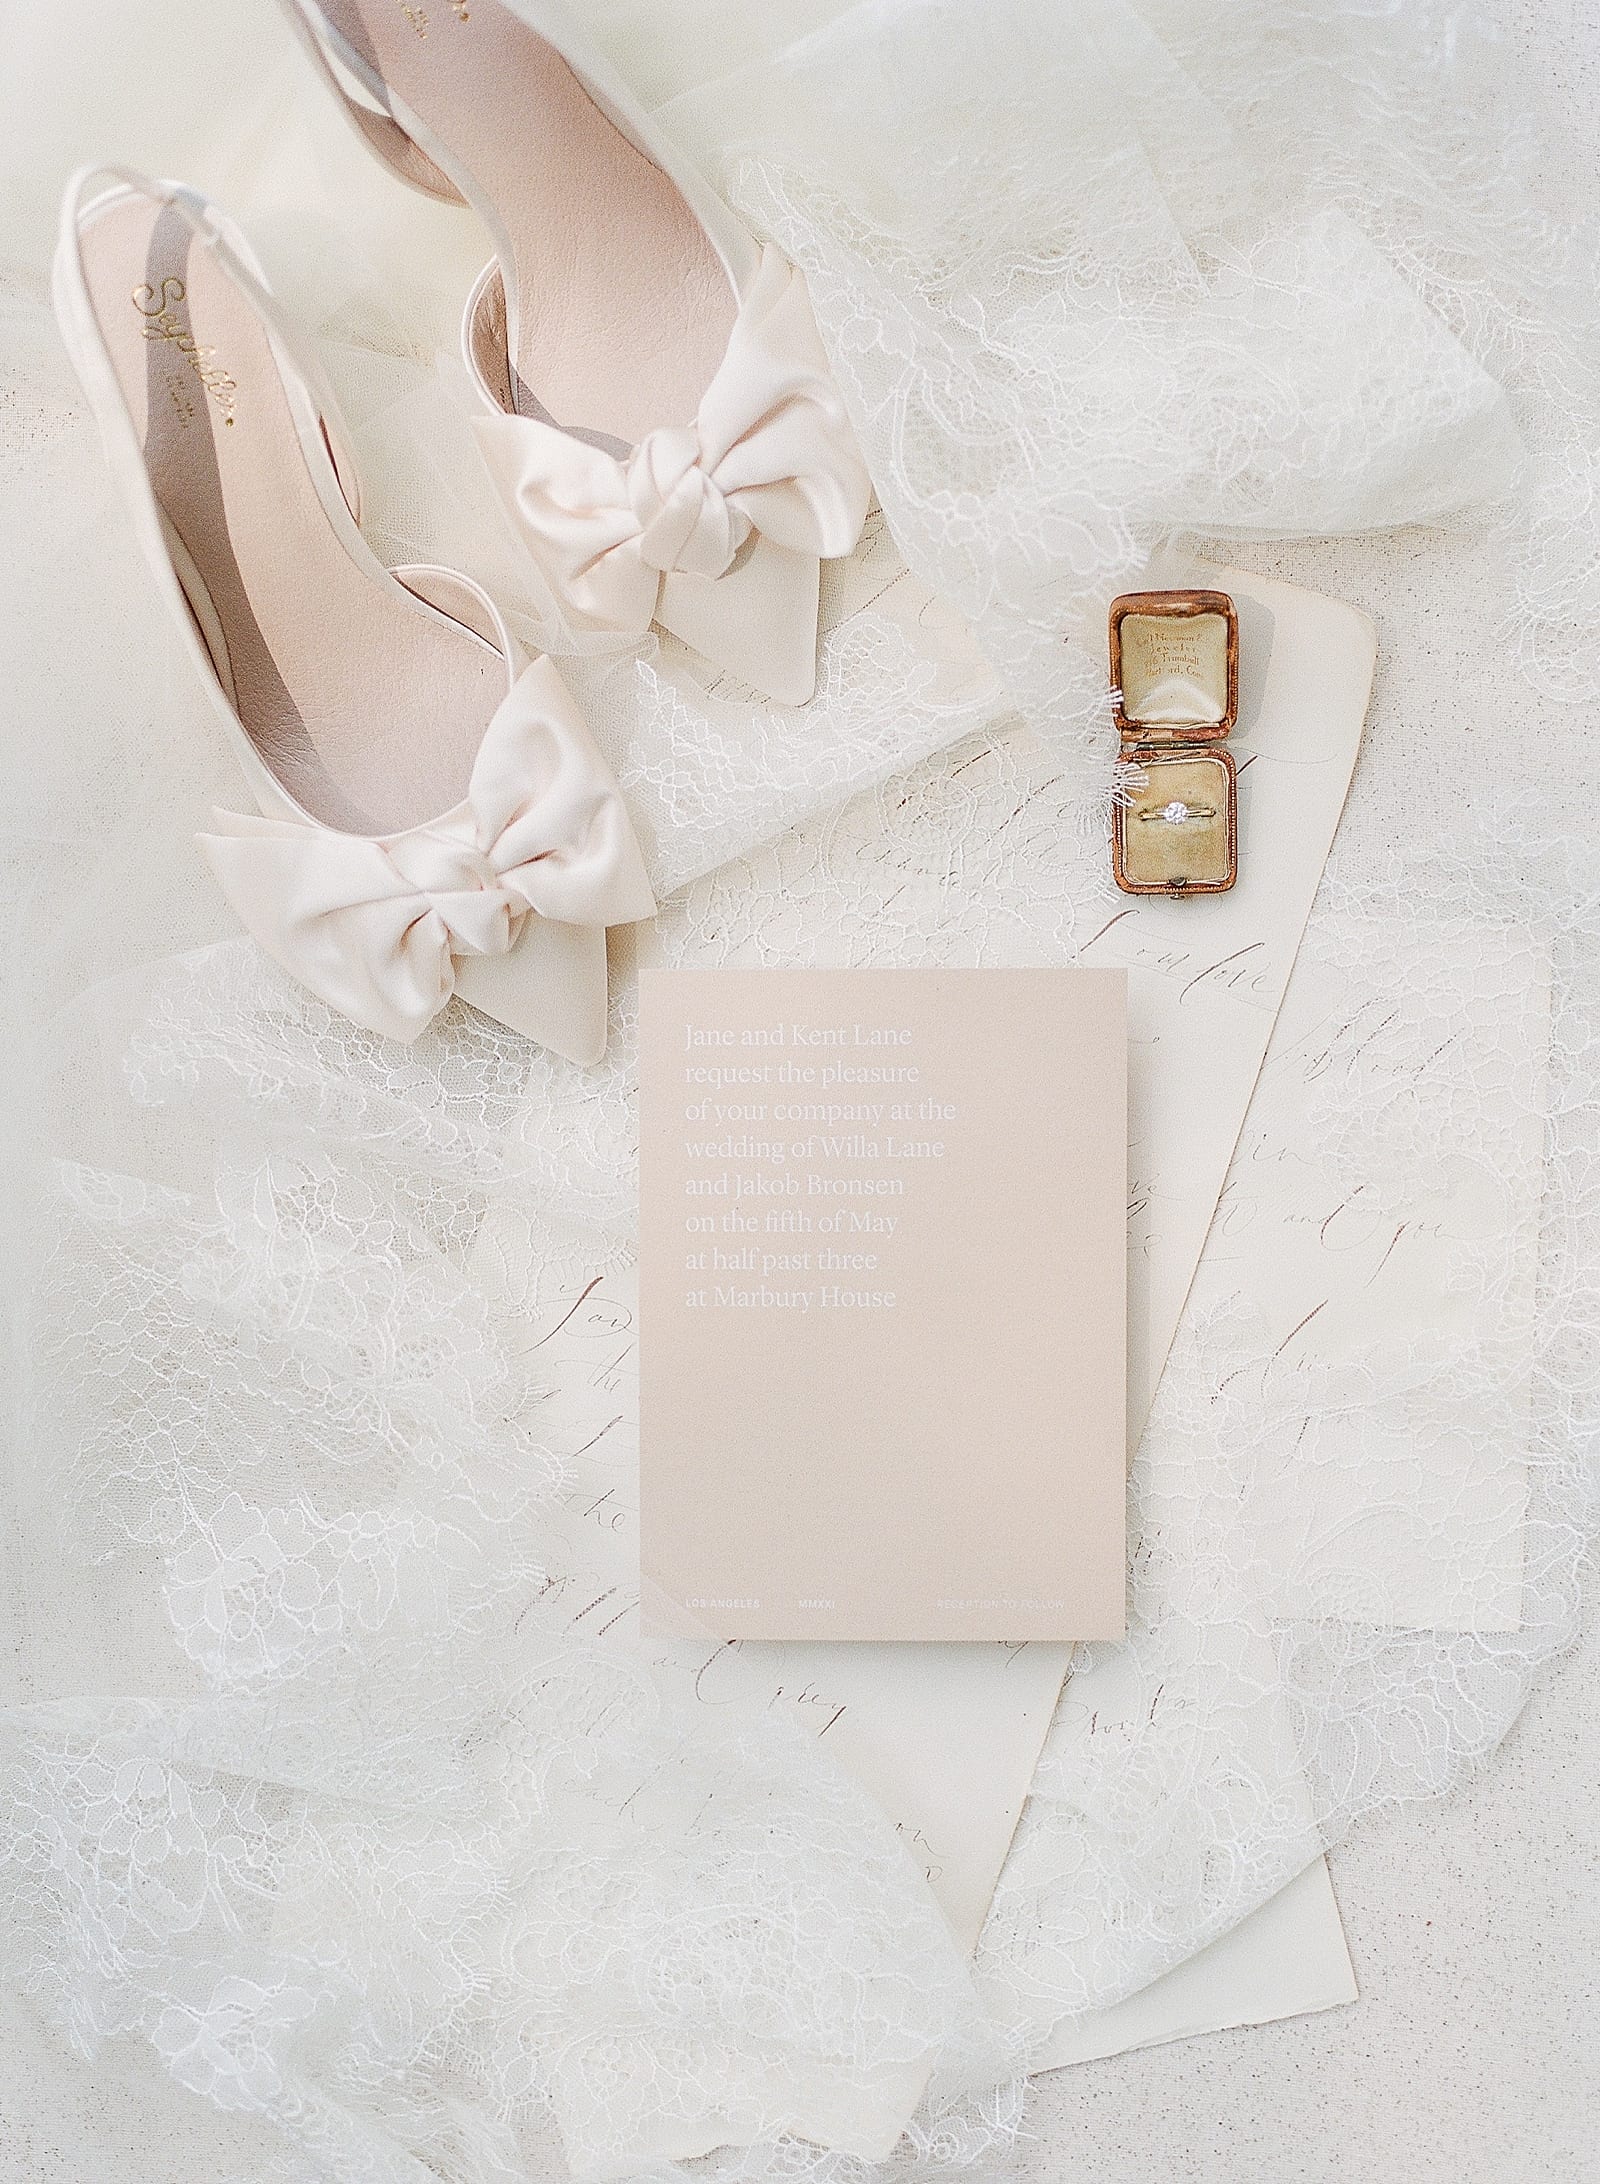 Wedding Details Brides Shoes Invitation and Ring at Swan House In Atlanta Photo